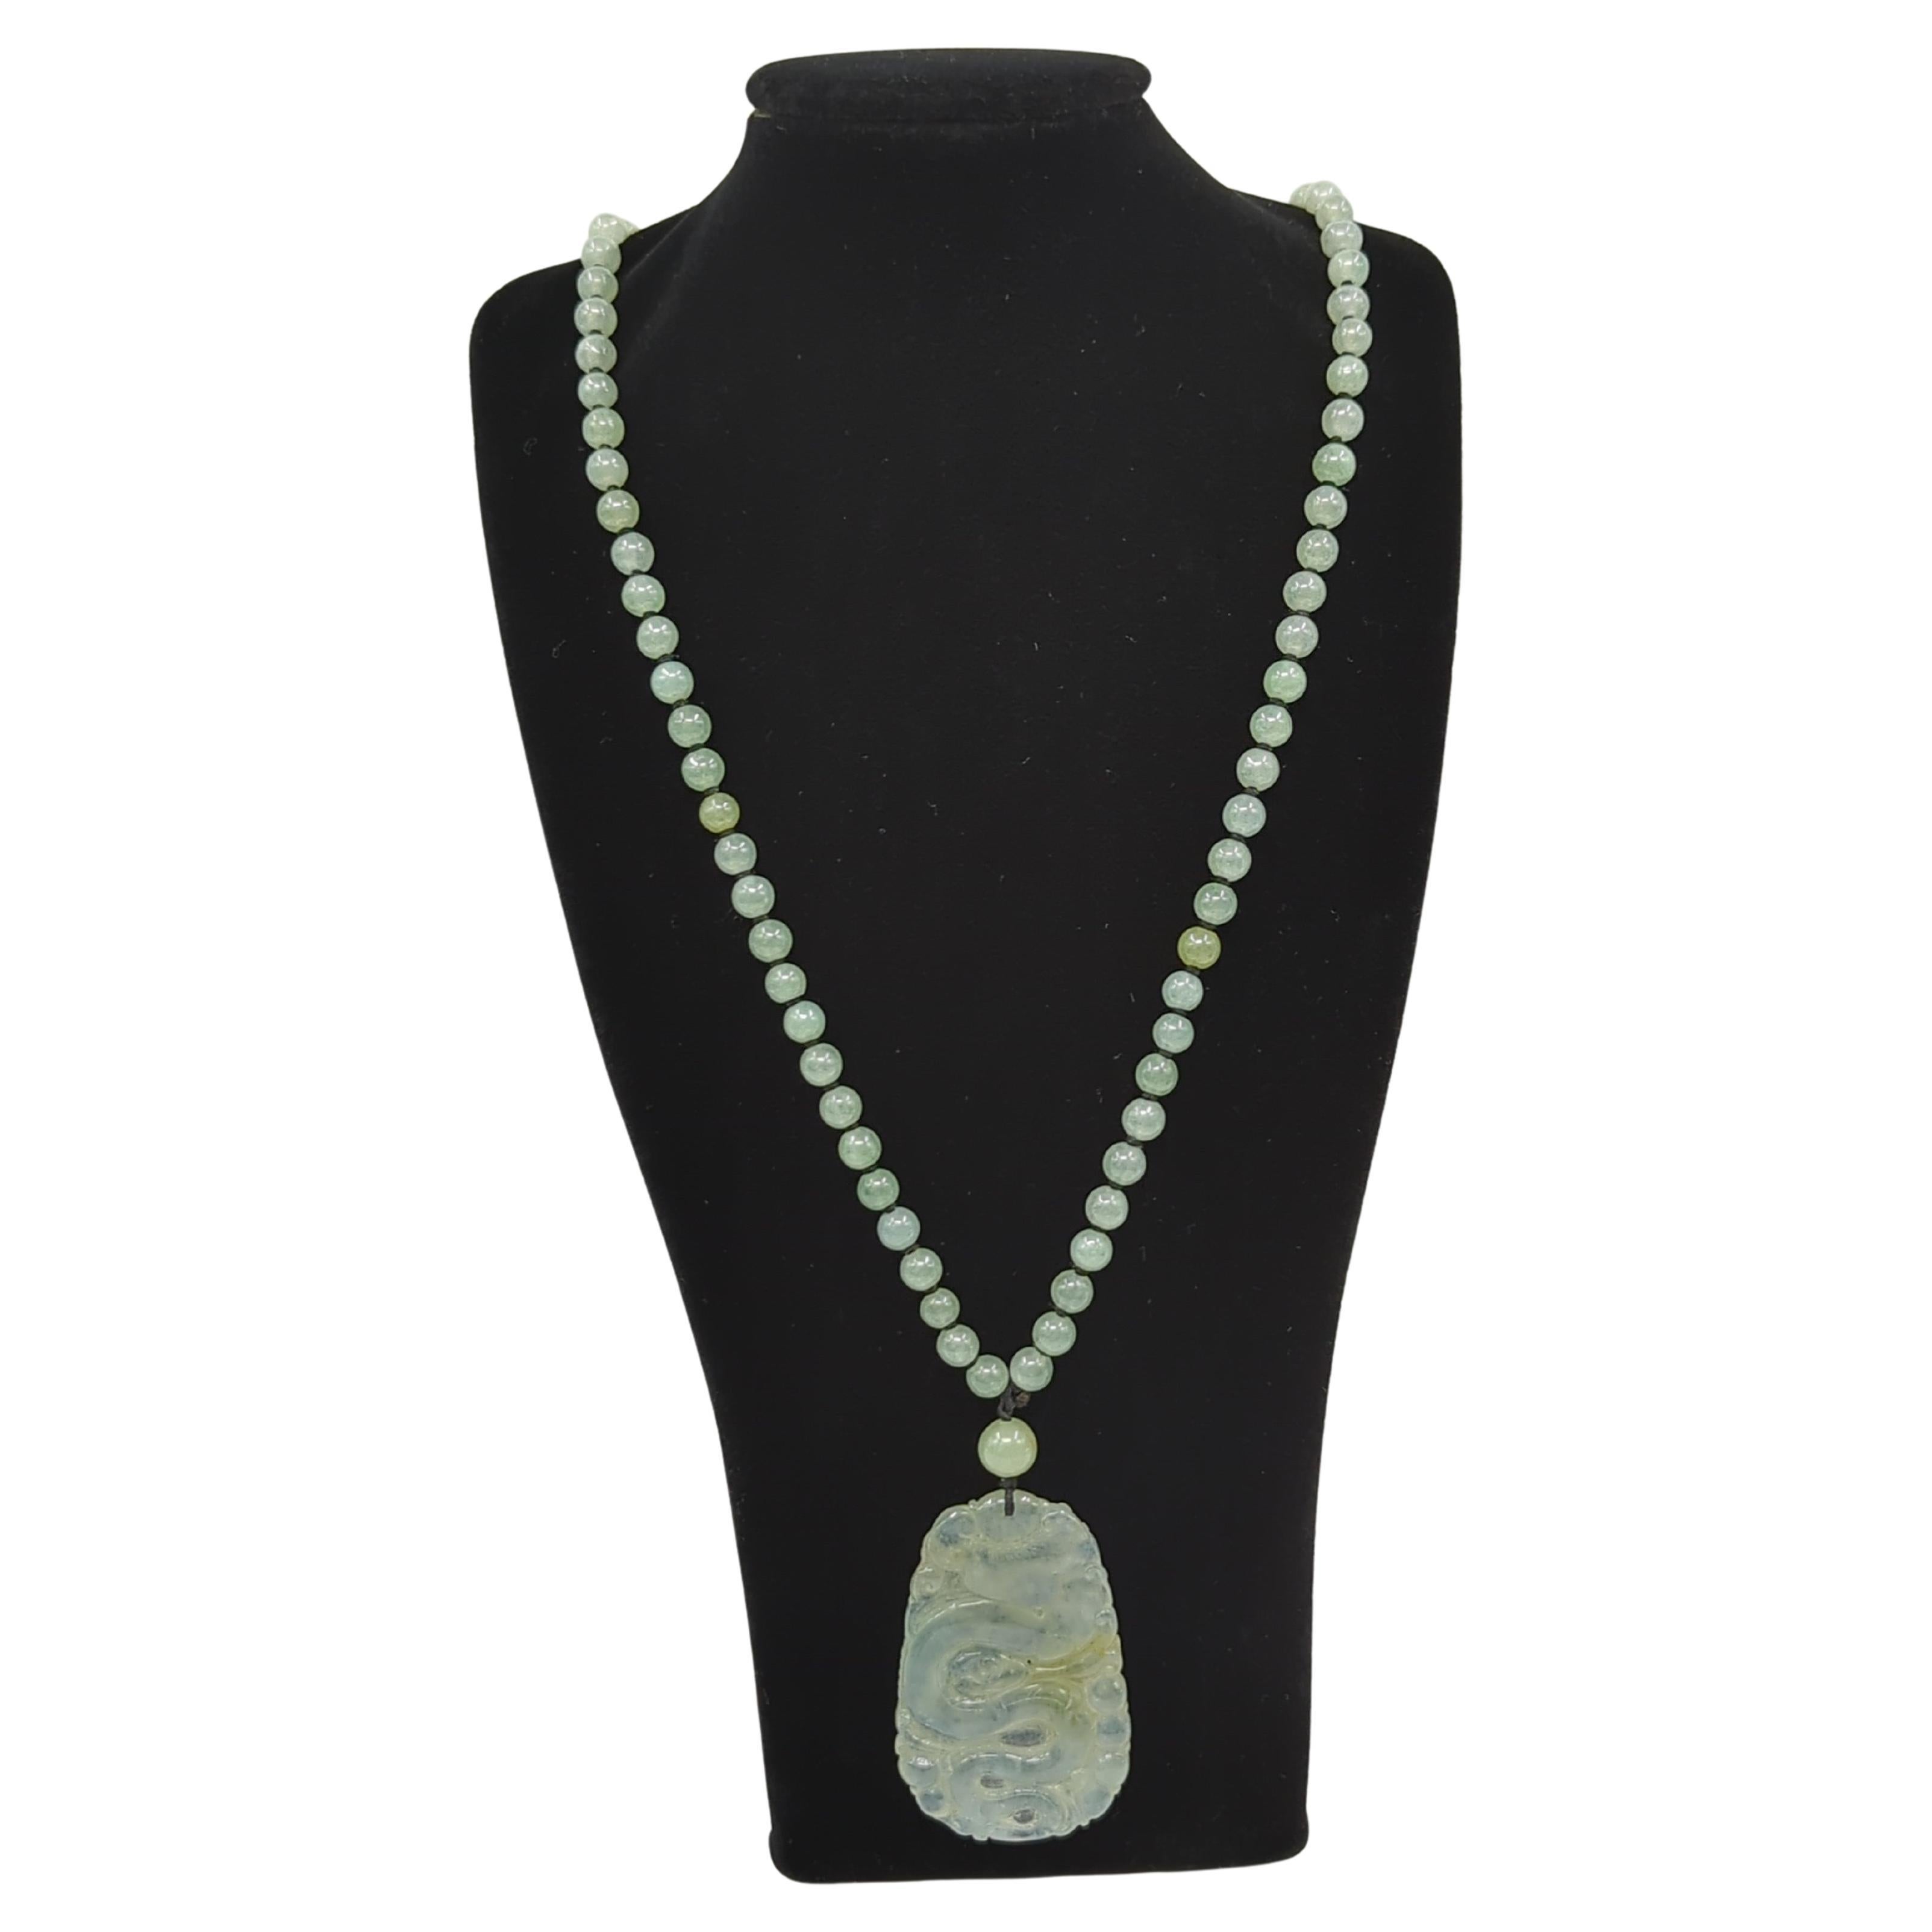 This exquisite icy jadeite beaded necklace showcases a 25